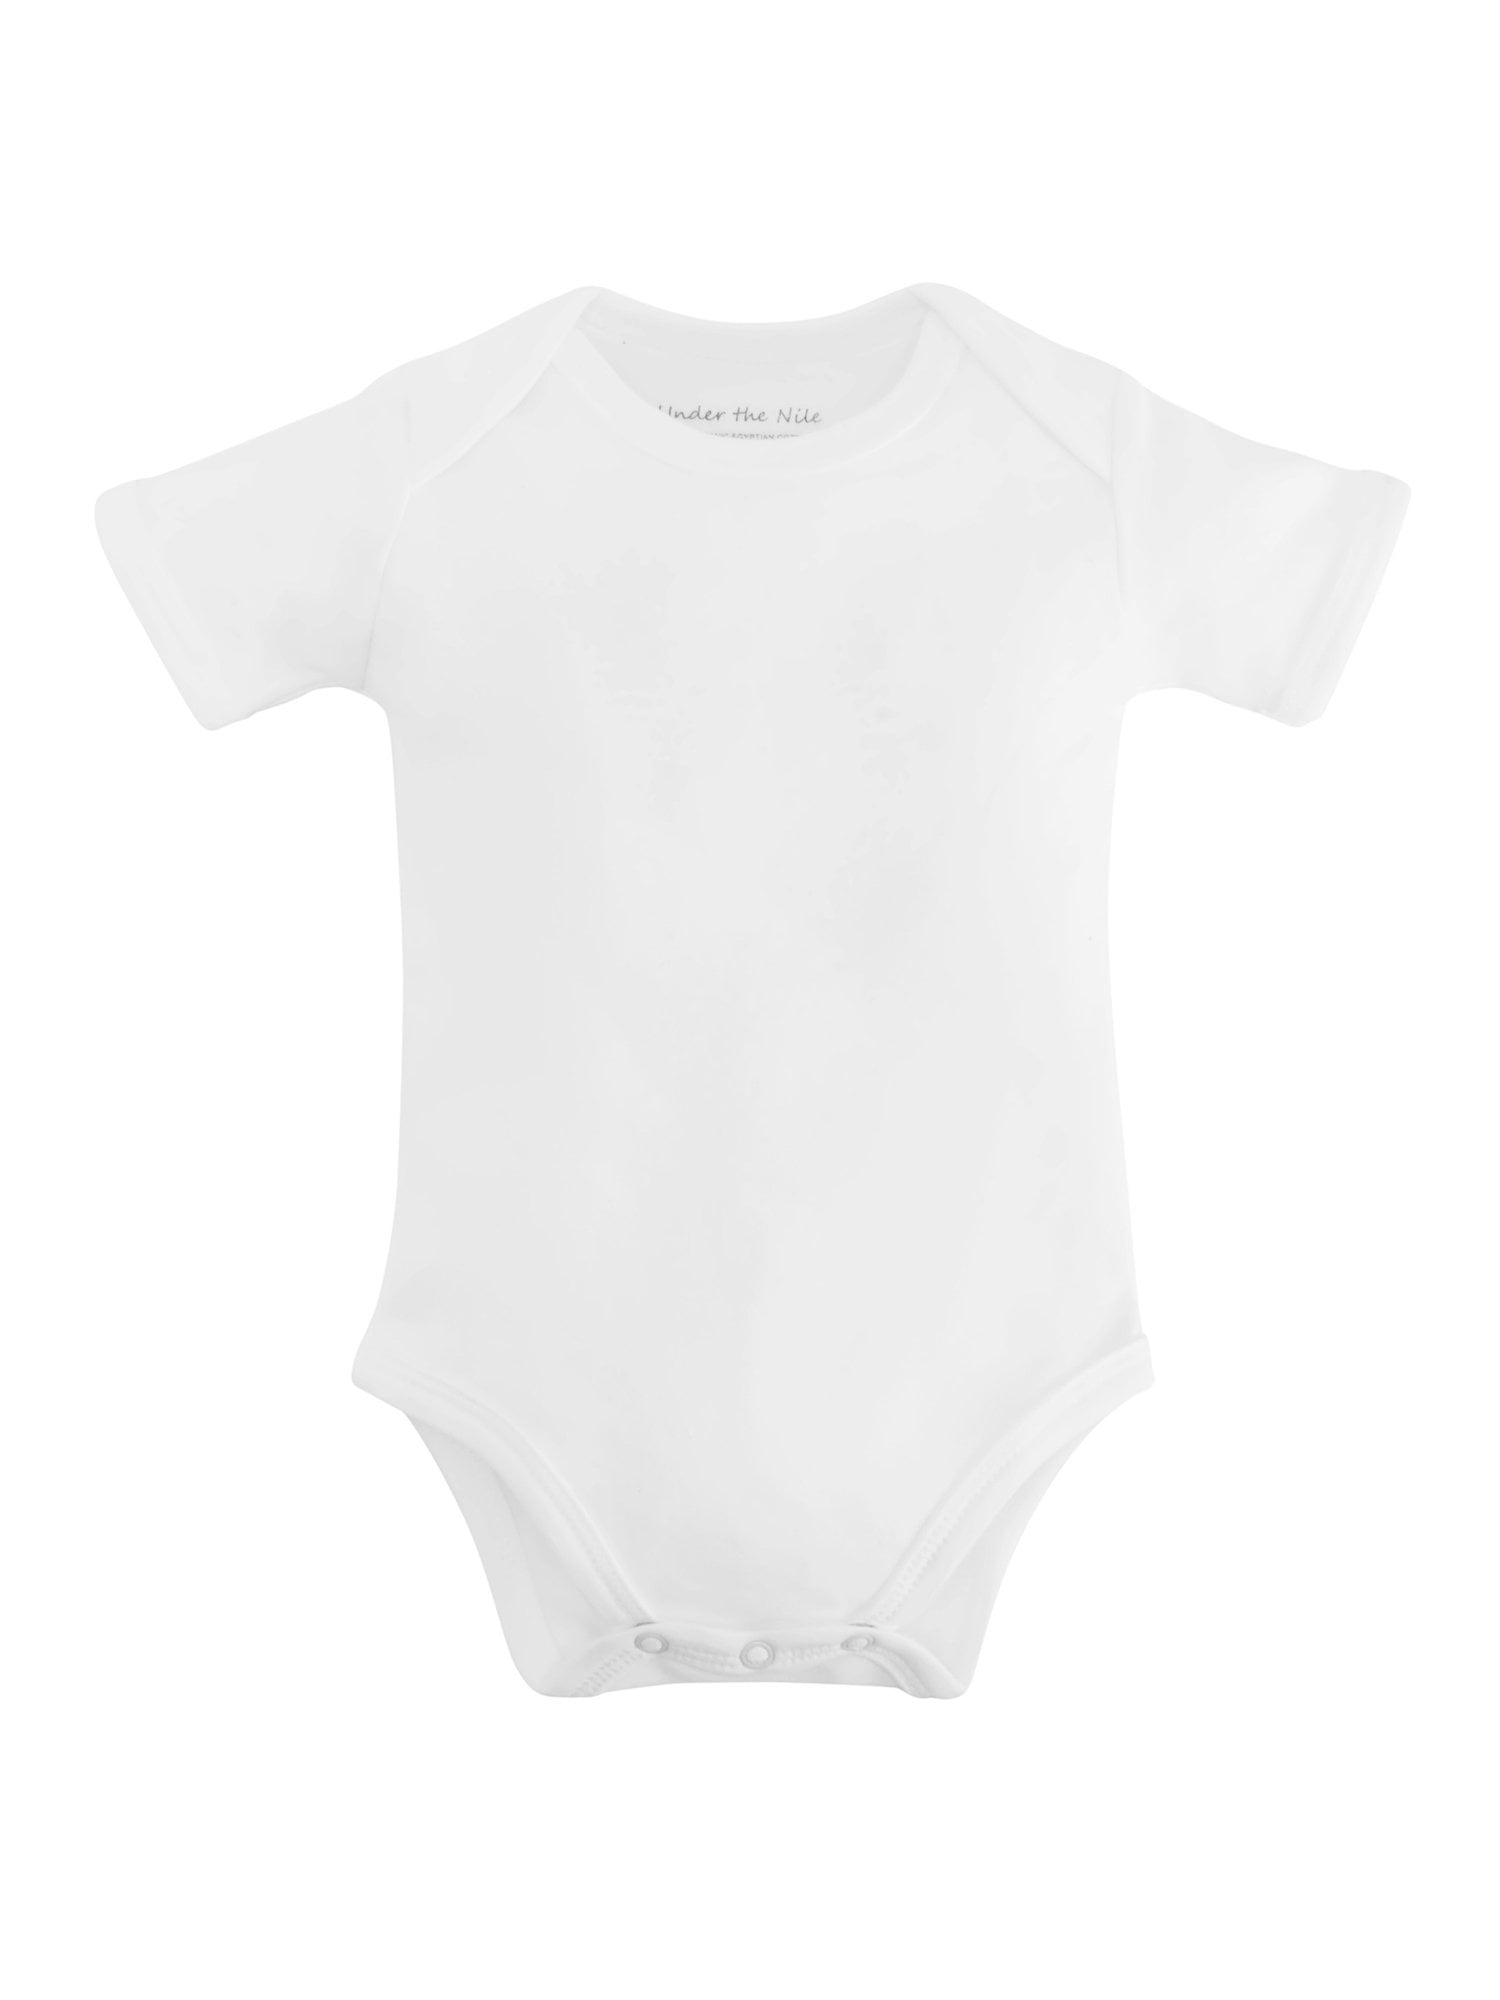 Baby Romper Straight Outta The Pale 100% Cotton Long Sleeve Infant Bodysuit 